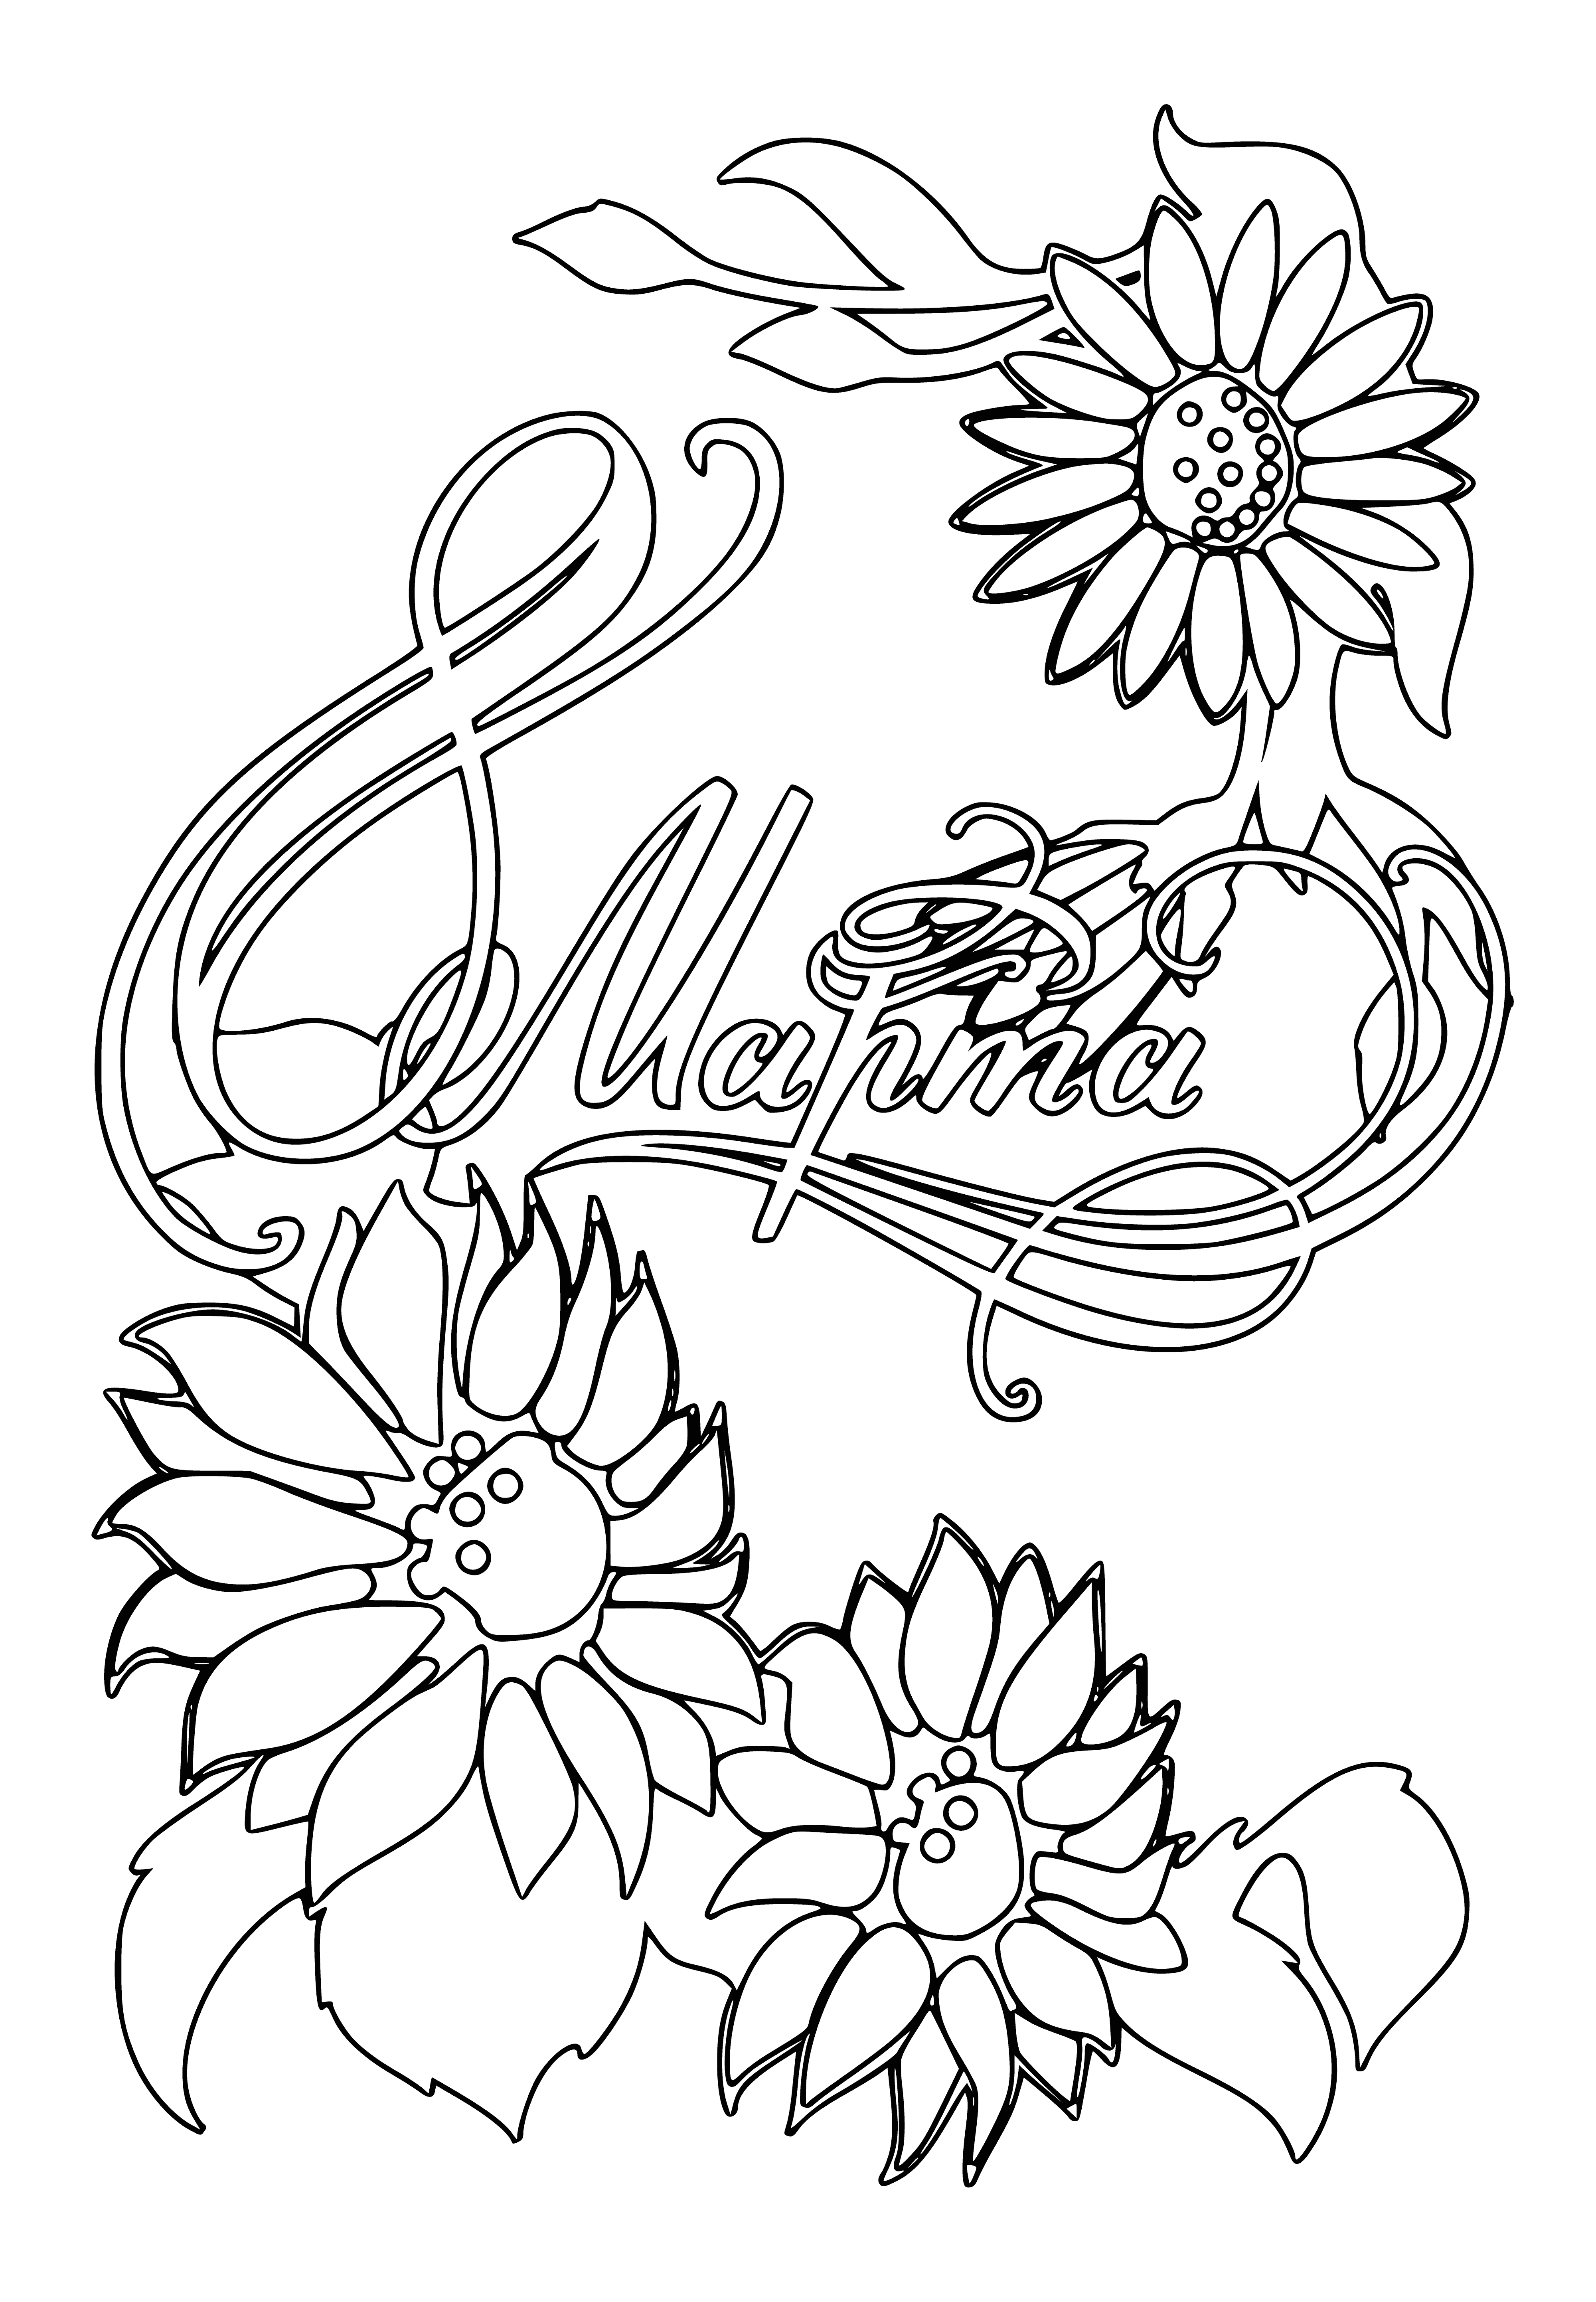 coloring page: Woman walking down city street carrying bouquet of pink, red, and purple flowers arranged in vase, with a smile on her face. #flowers